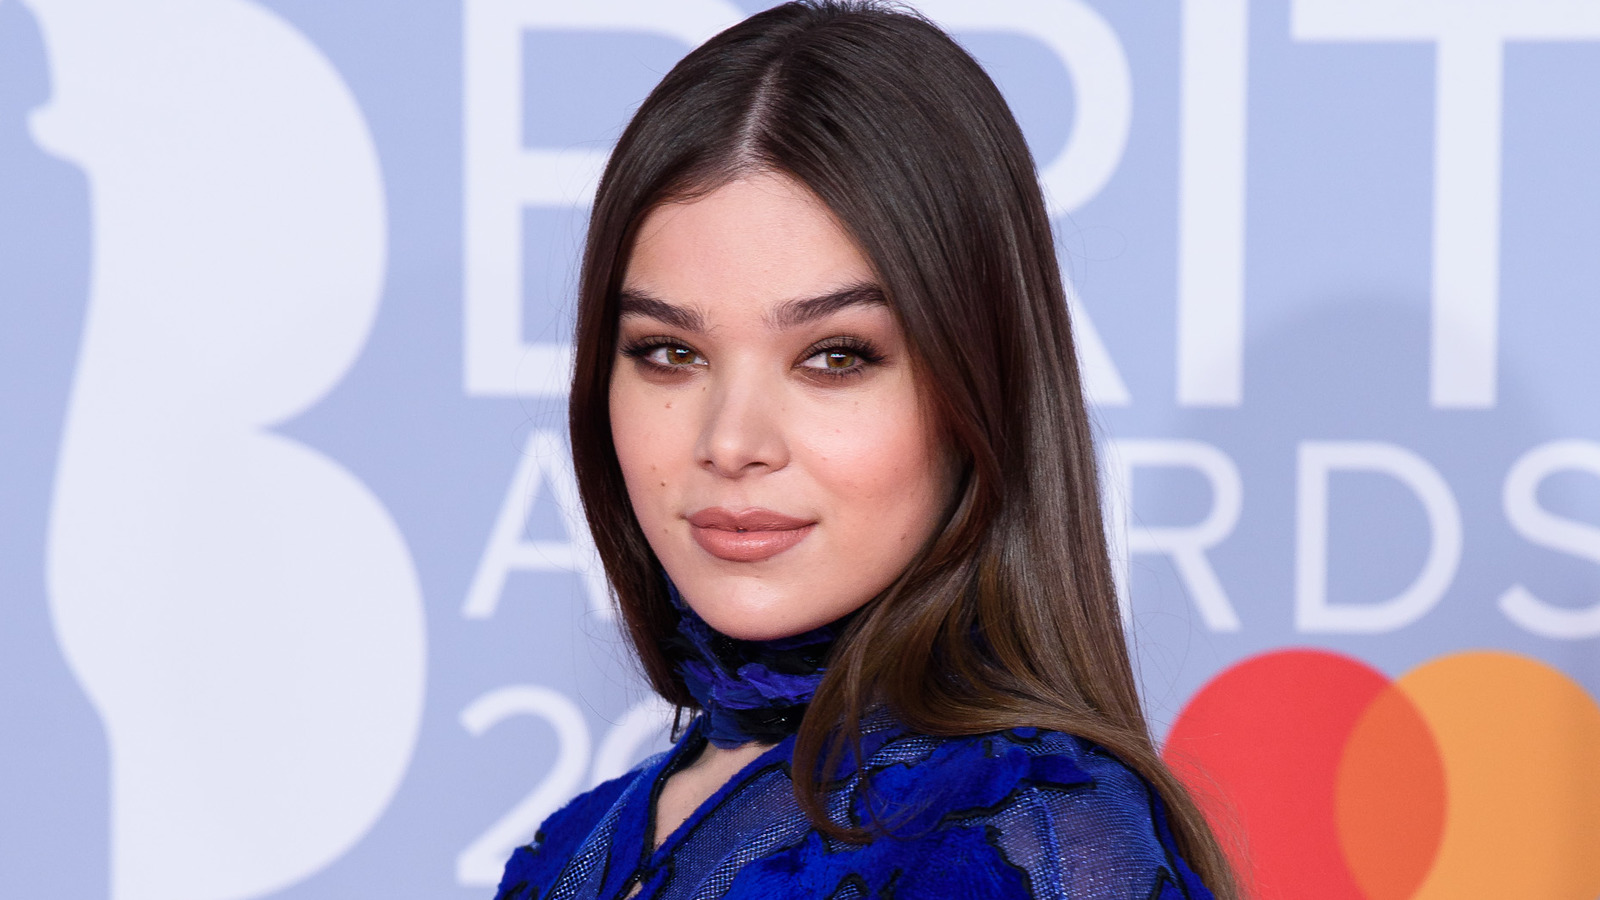 It does not take long into the first listen to find that Hailee Steinfeld i...